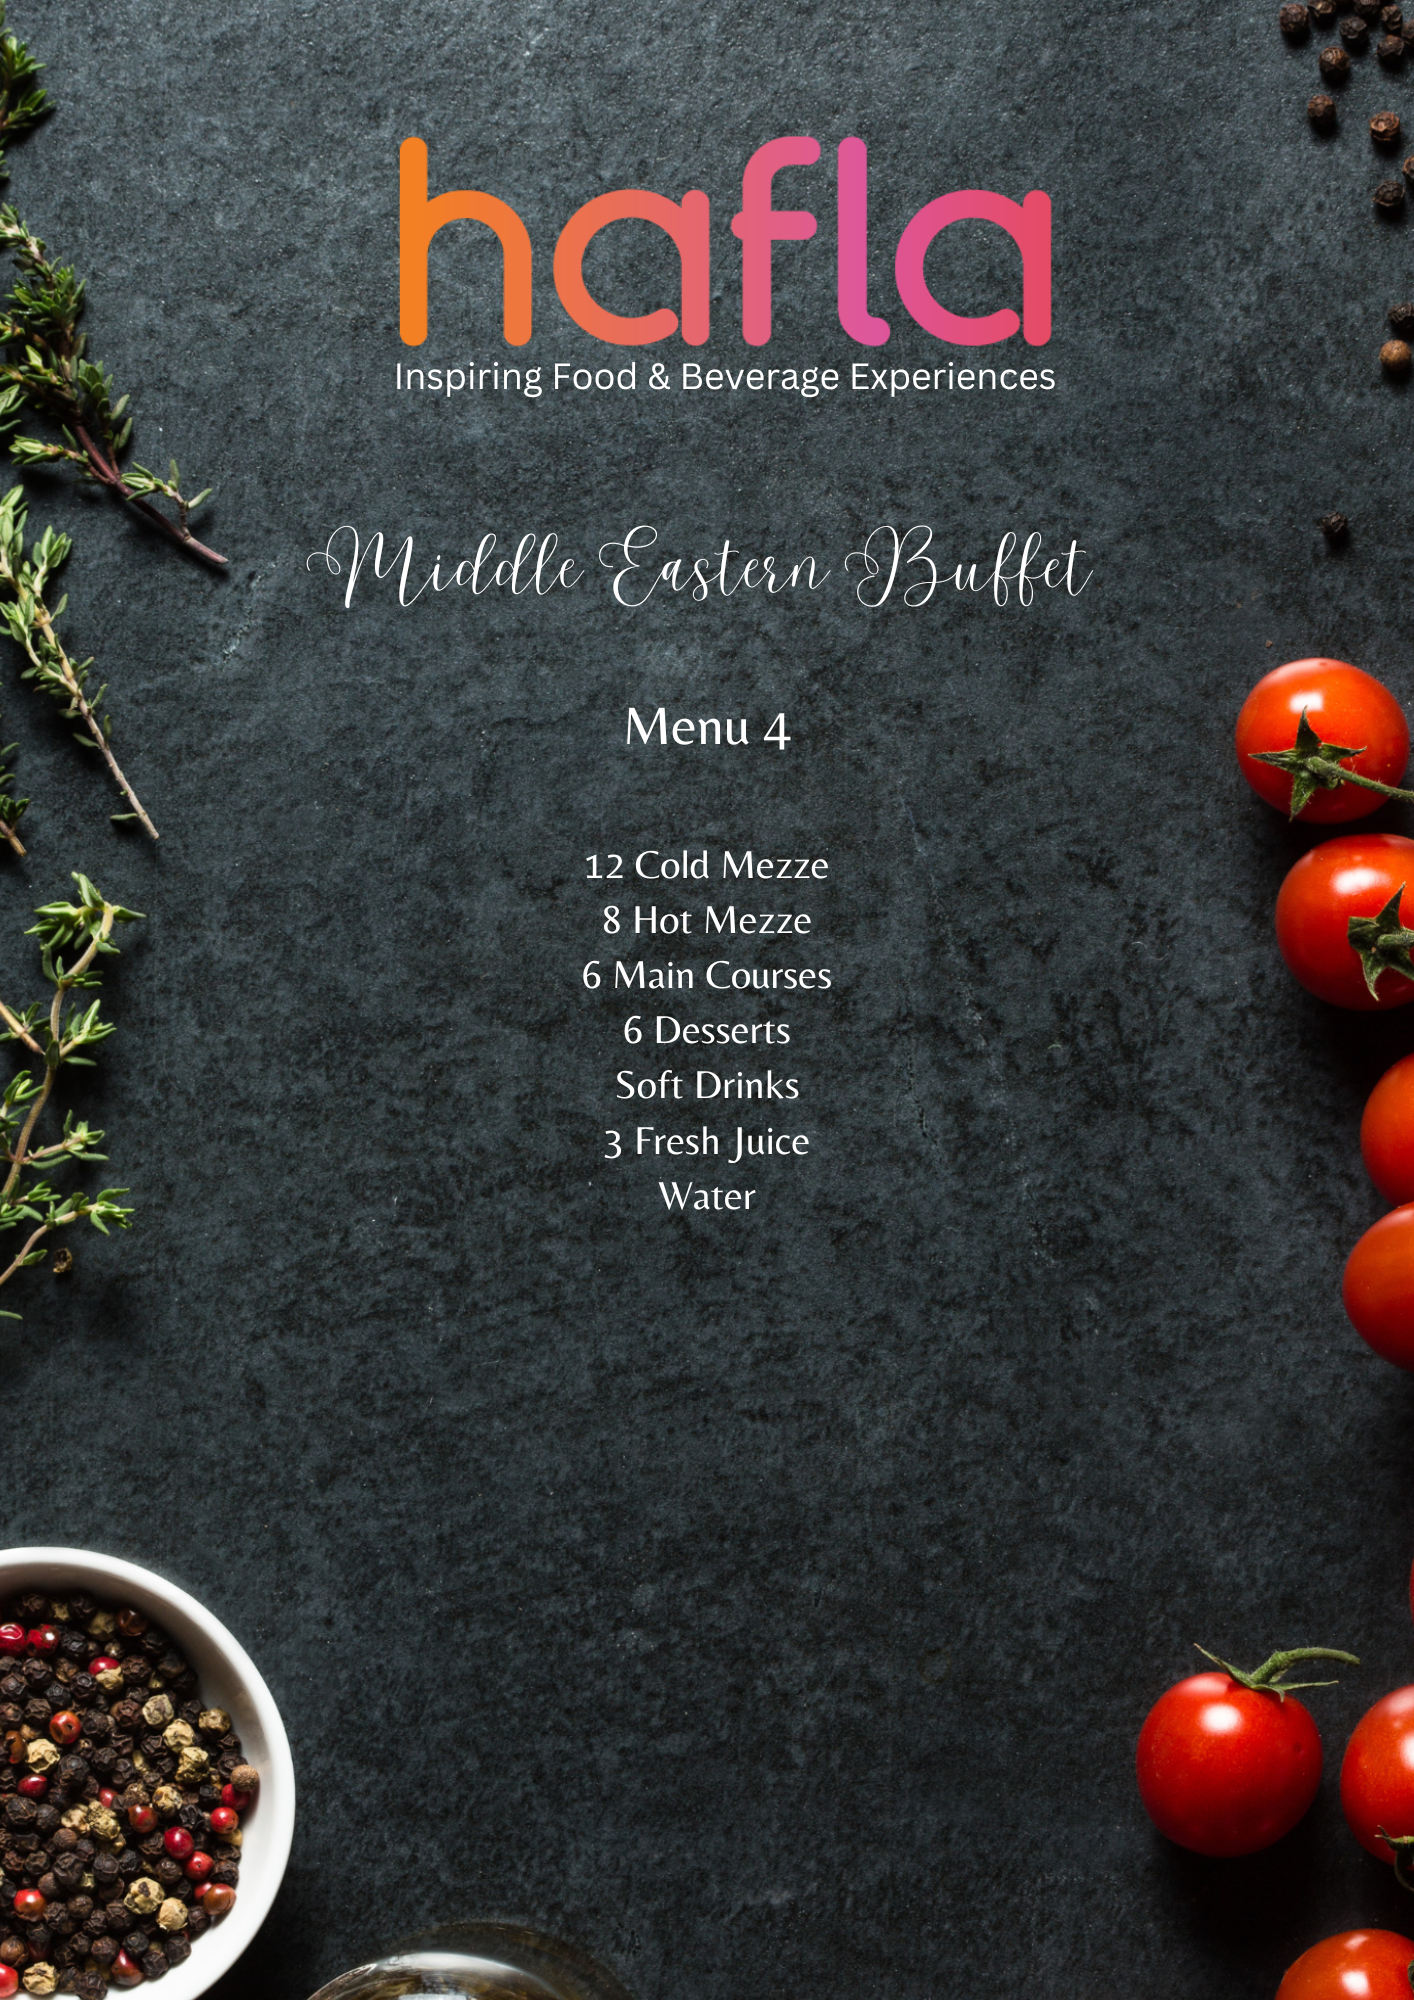 Middle Eastern Buffet by Experts Catering